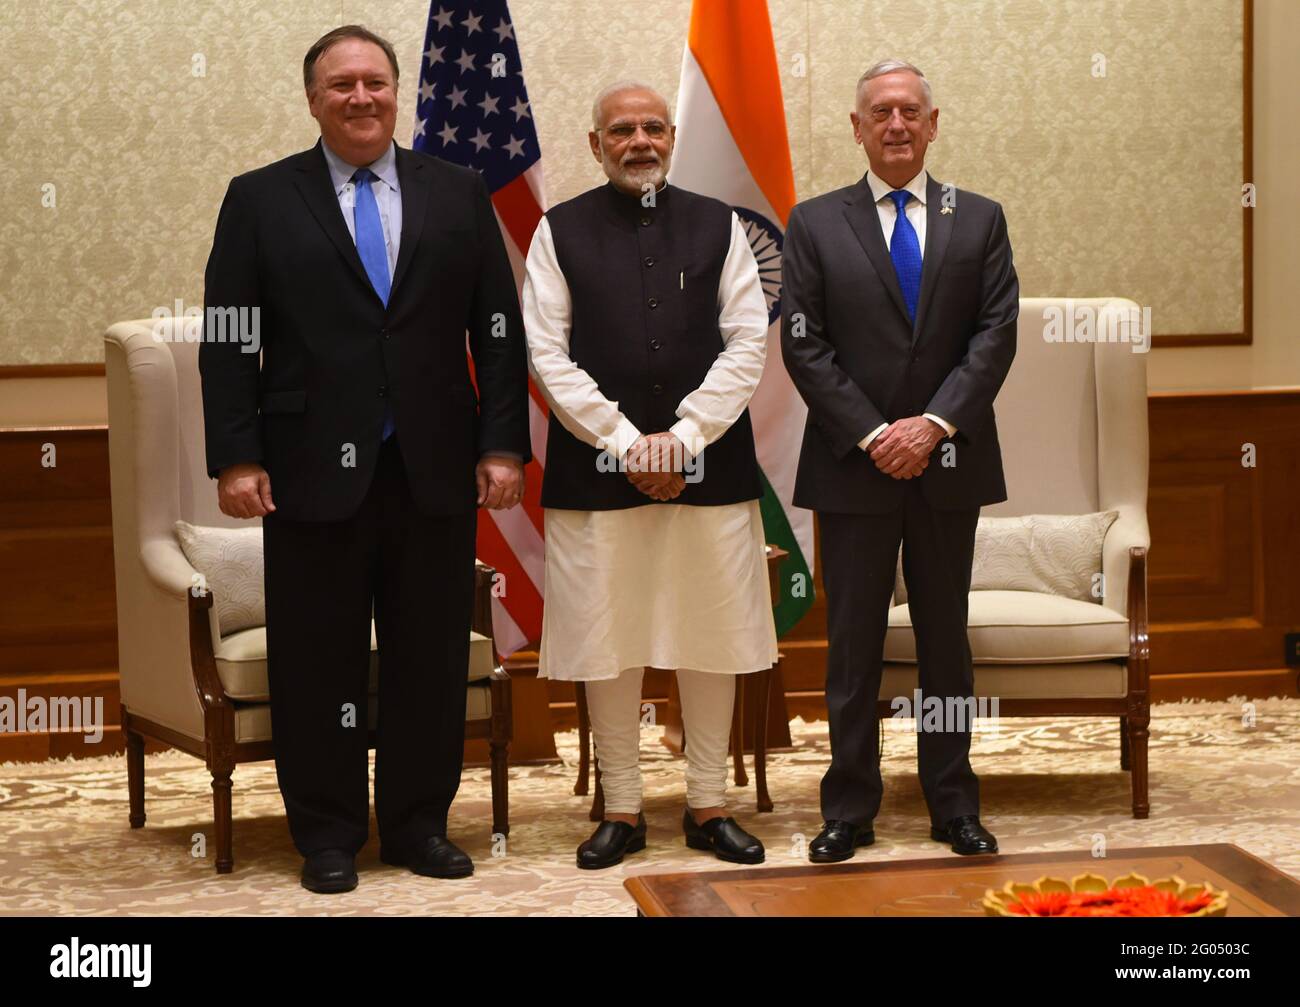 Reportage:  (from left) U.S. Secretary of State Michael Pompeo, Indian Prime Minister Narendra Modi and U.S. Secretary of Defense James N. Mattis meet at Modiâ€™s residence, New Delhi, India, Sept. 6, 2018. Mattis, along with U.S. Secretary of State Michael Pompeo, Chairman of the Joint Chiefs of Staff  Gen. Joseph F. Dunford and other top U.S. officials met with Modi following the first ever U.S.-India 2+2 ministerial dialogue, where Mattis and Pompeo met with their Indian counterparts. Stock Photo